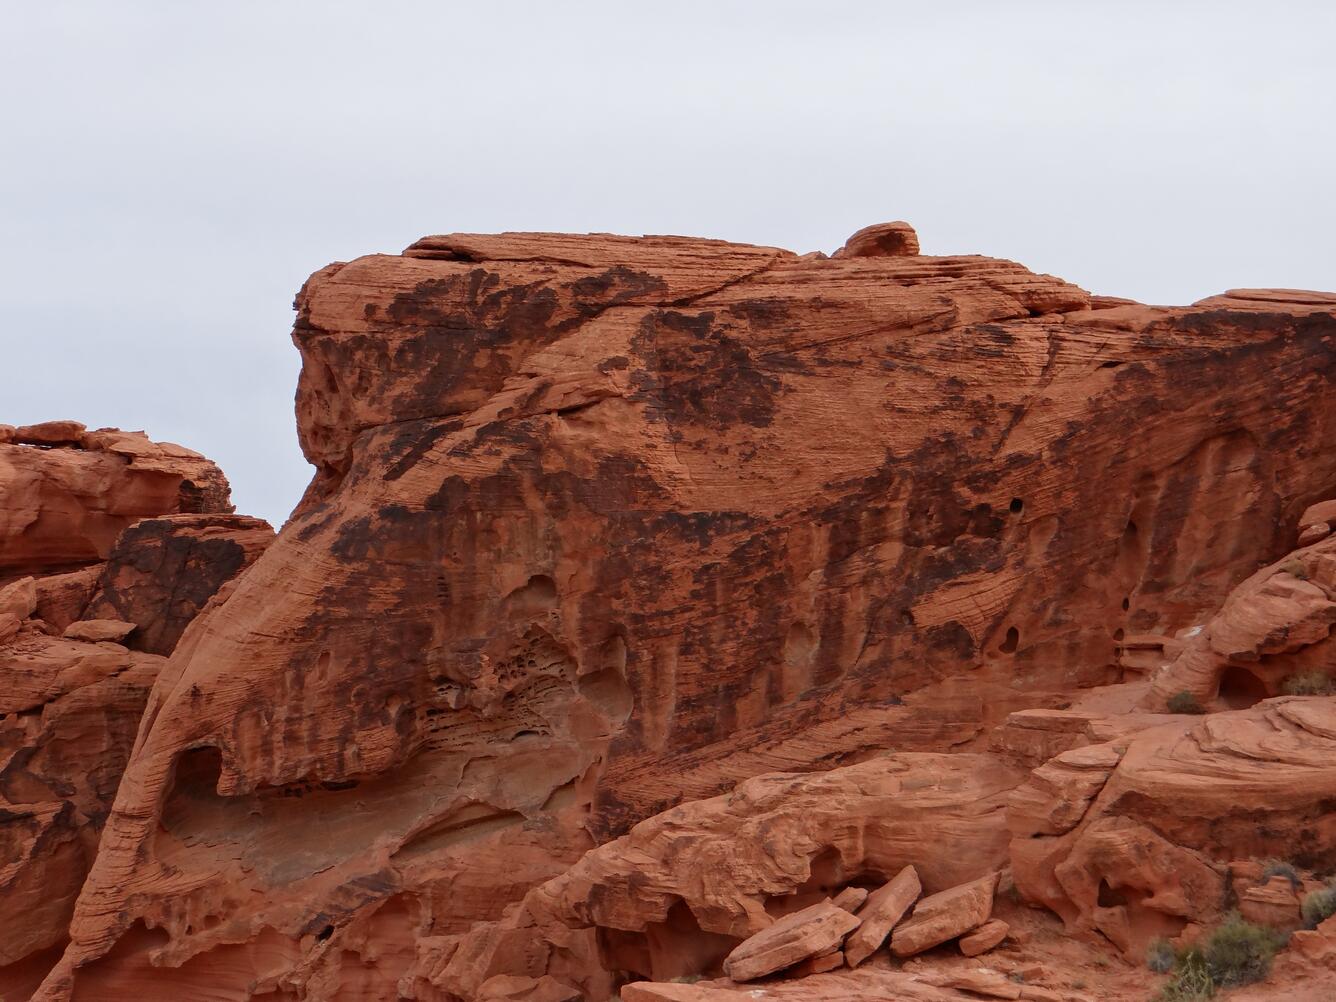 Image: Sandstone Formation in the Valley of Fire